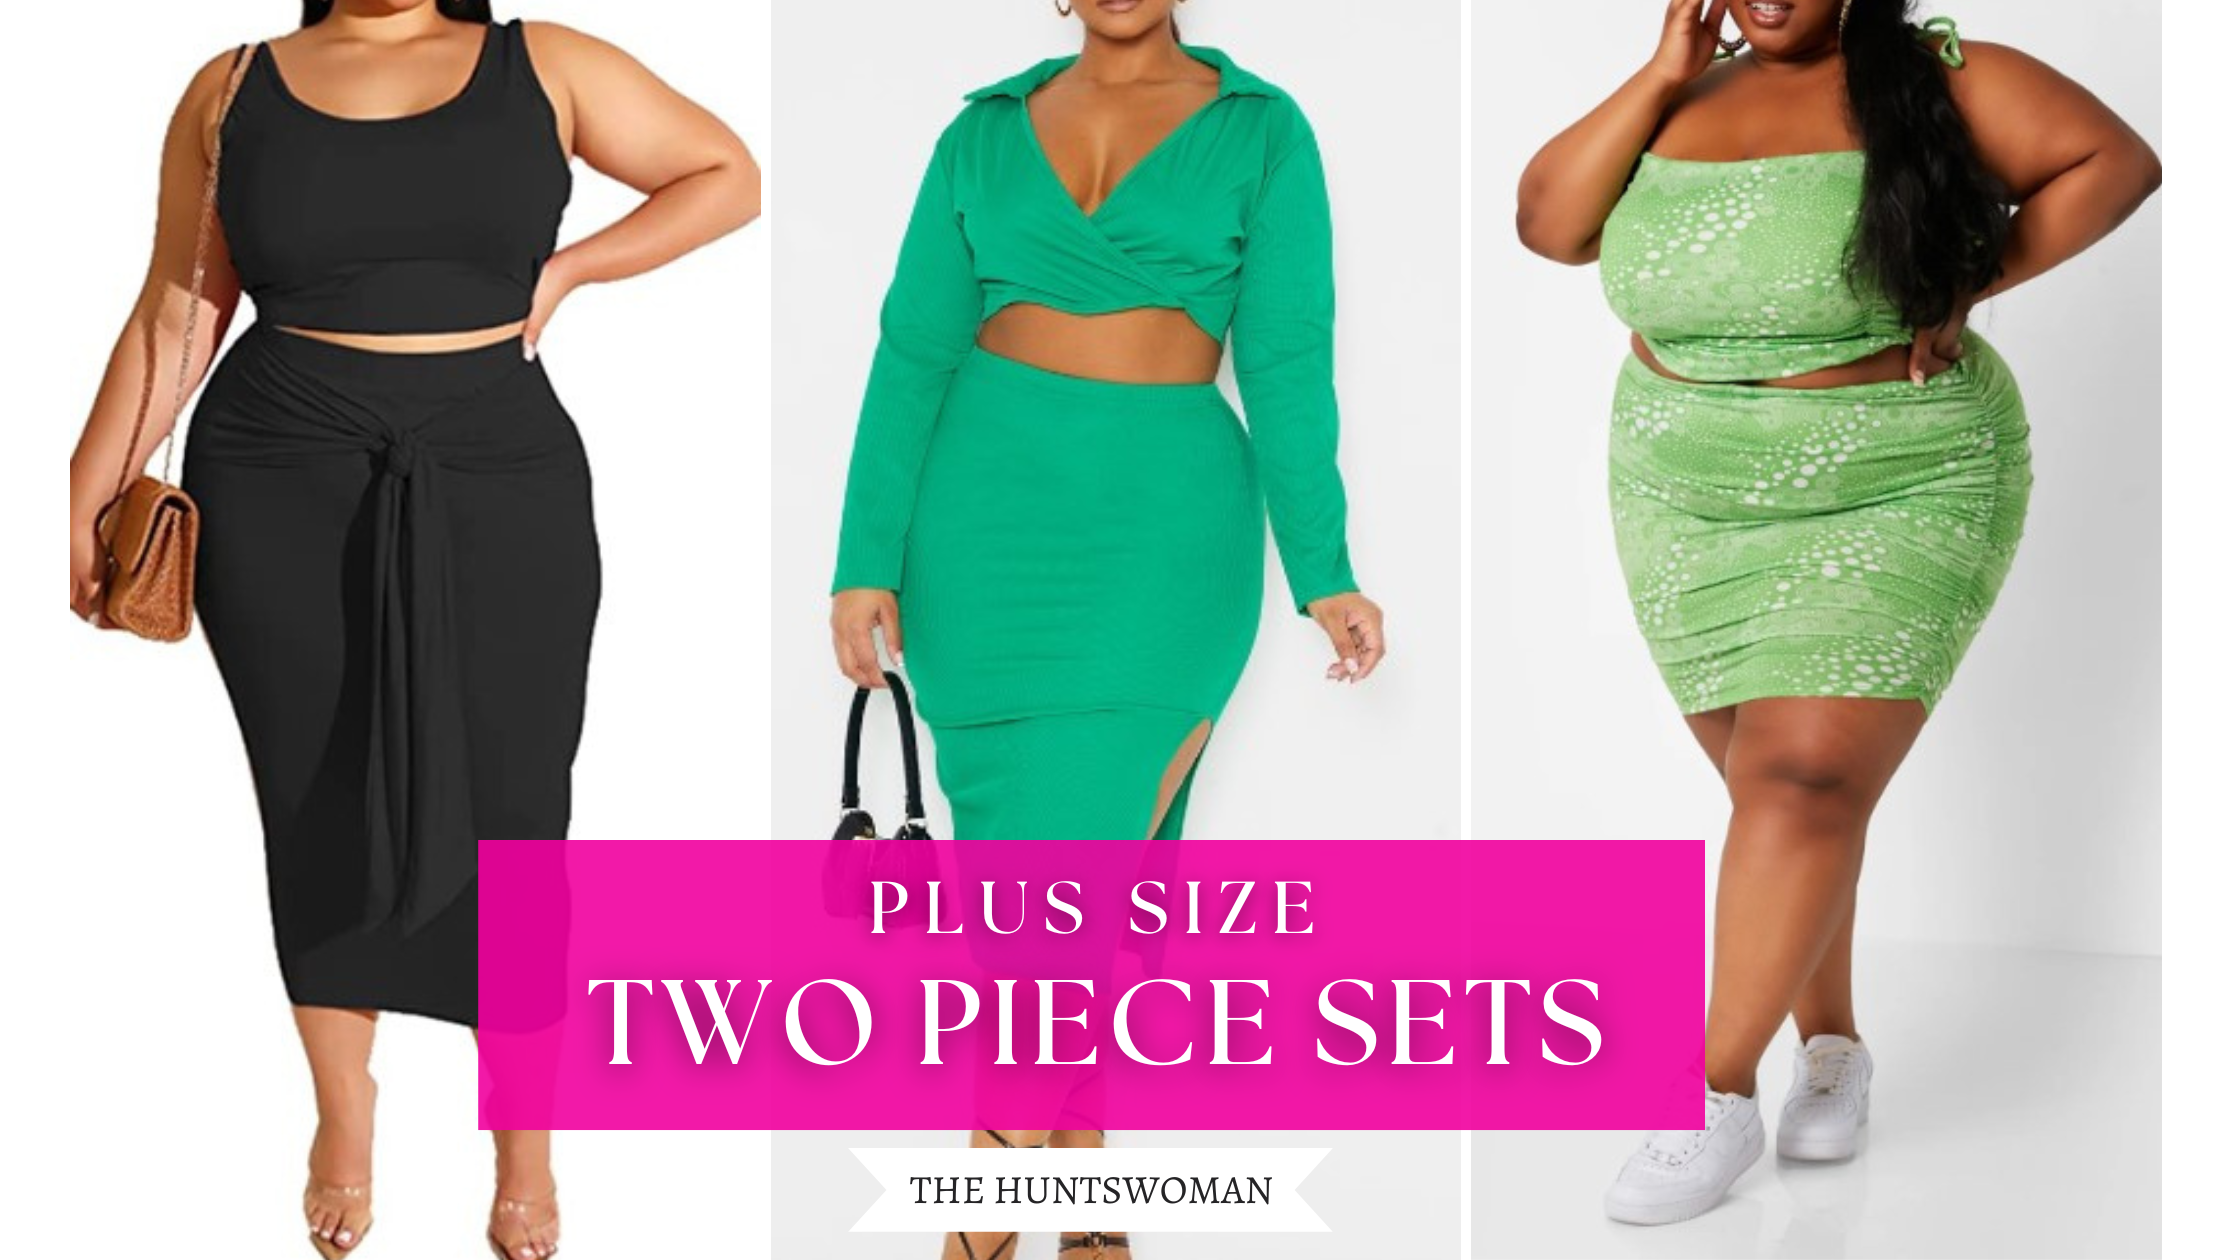  IyMoo Women Sexy Plus Size 3 Piece Outfits - Crop Top